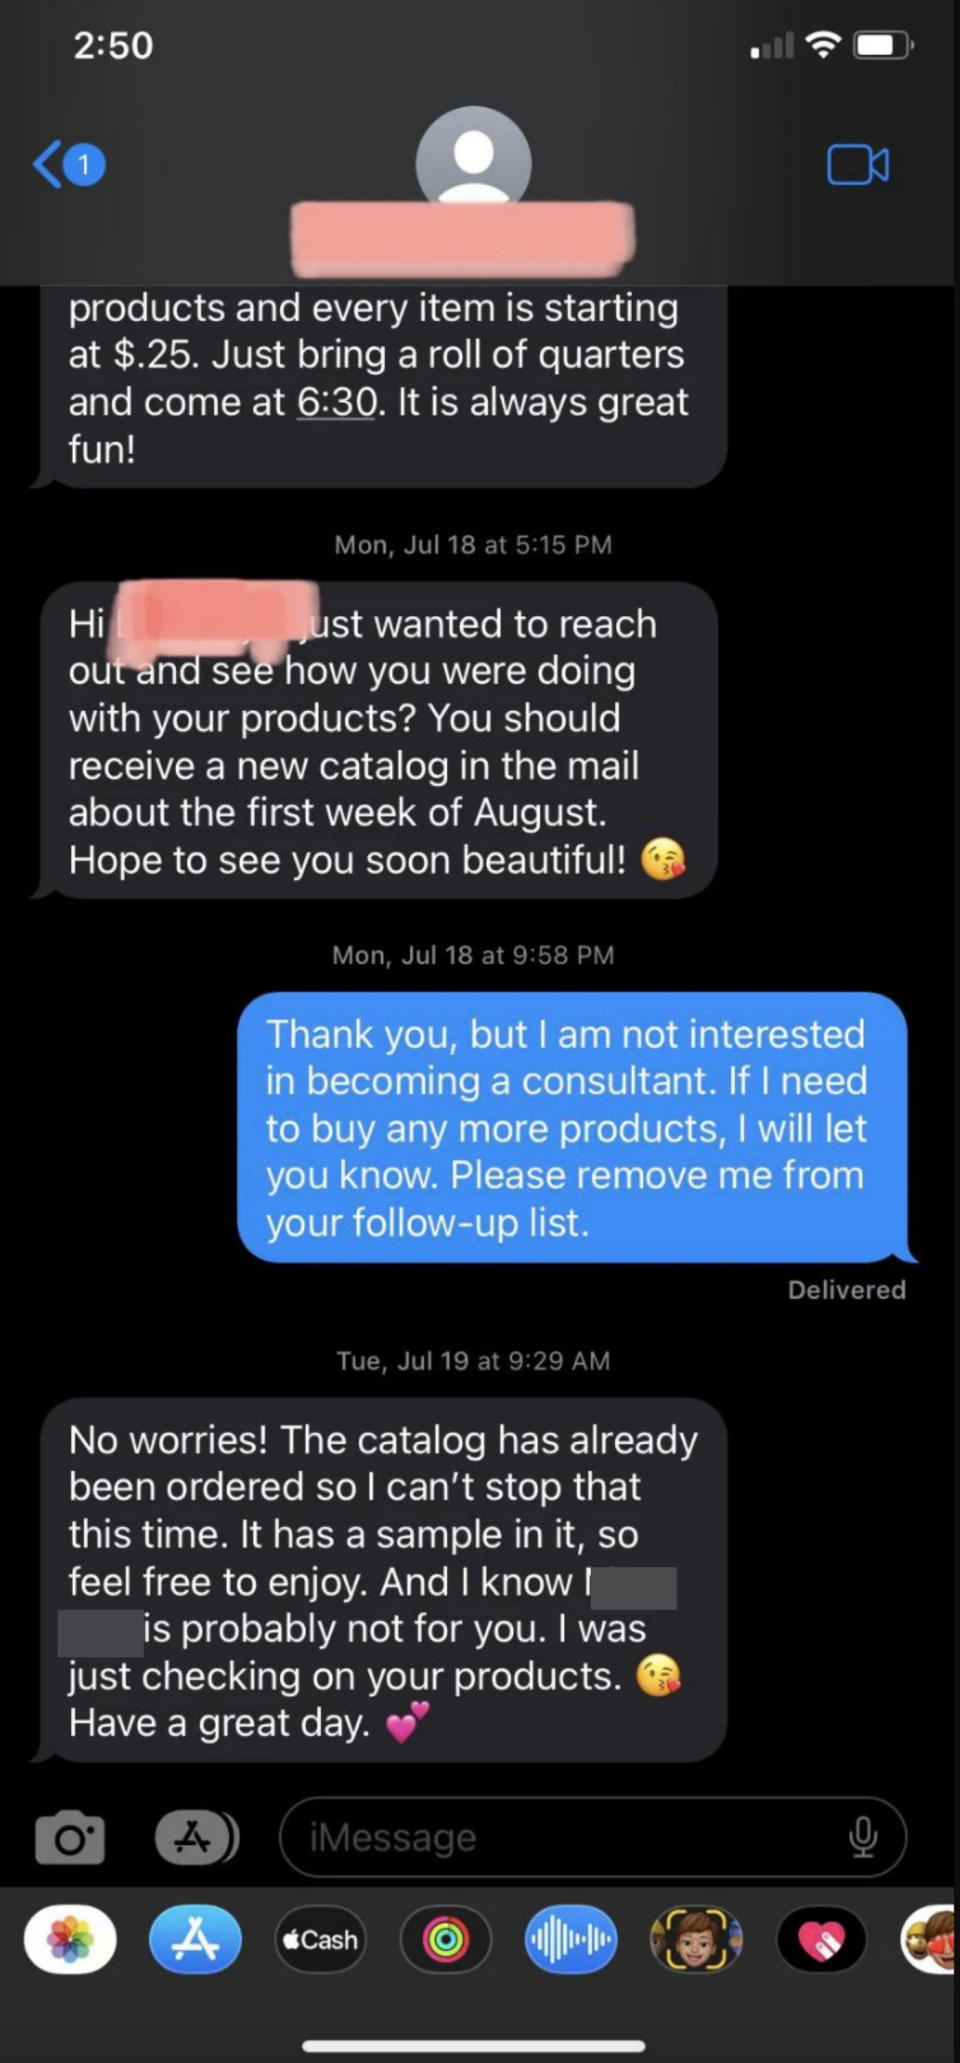 A person says they're not interested in becoming a consultant, and the other person responds that a catalog has already been shipped to them but they can move on afterward